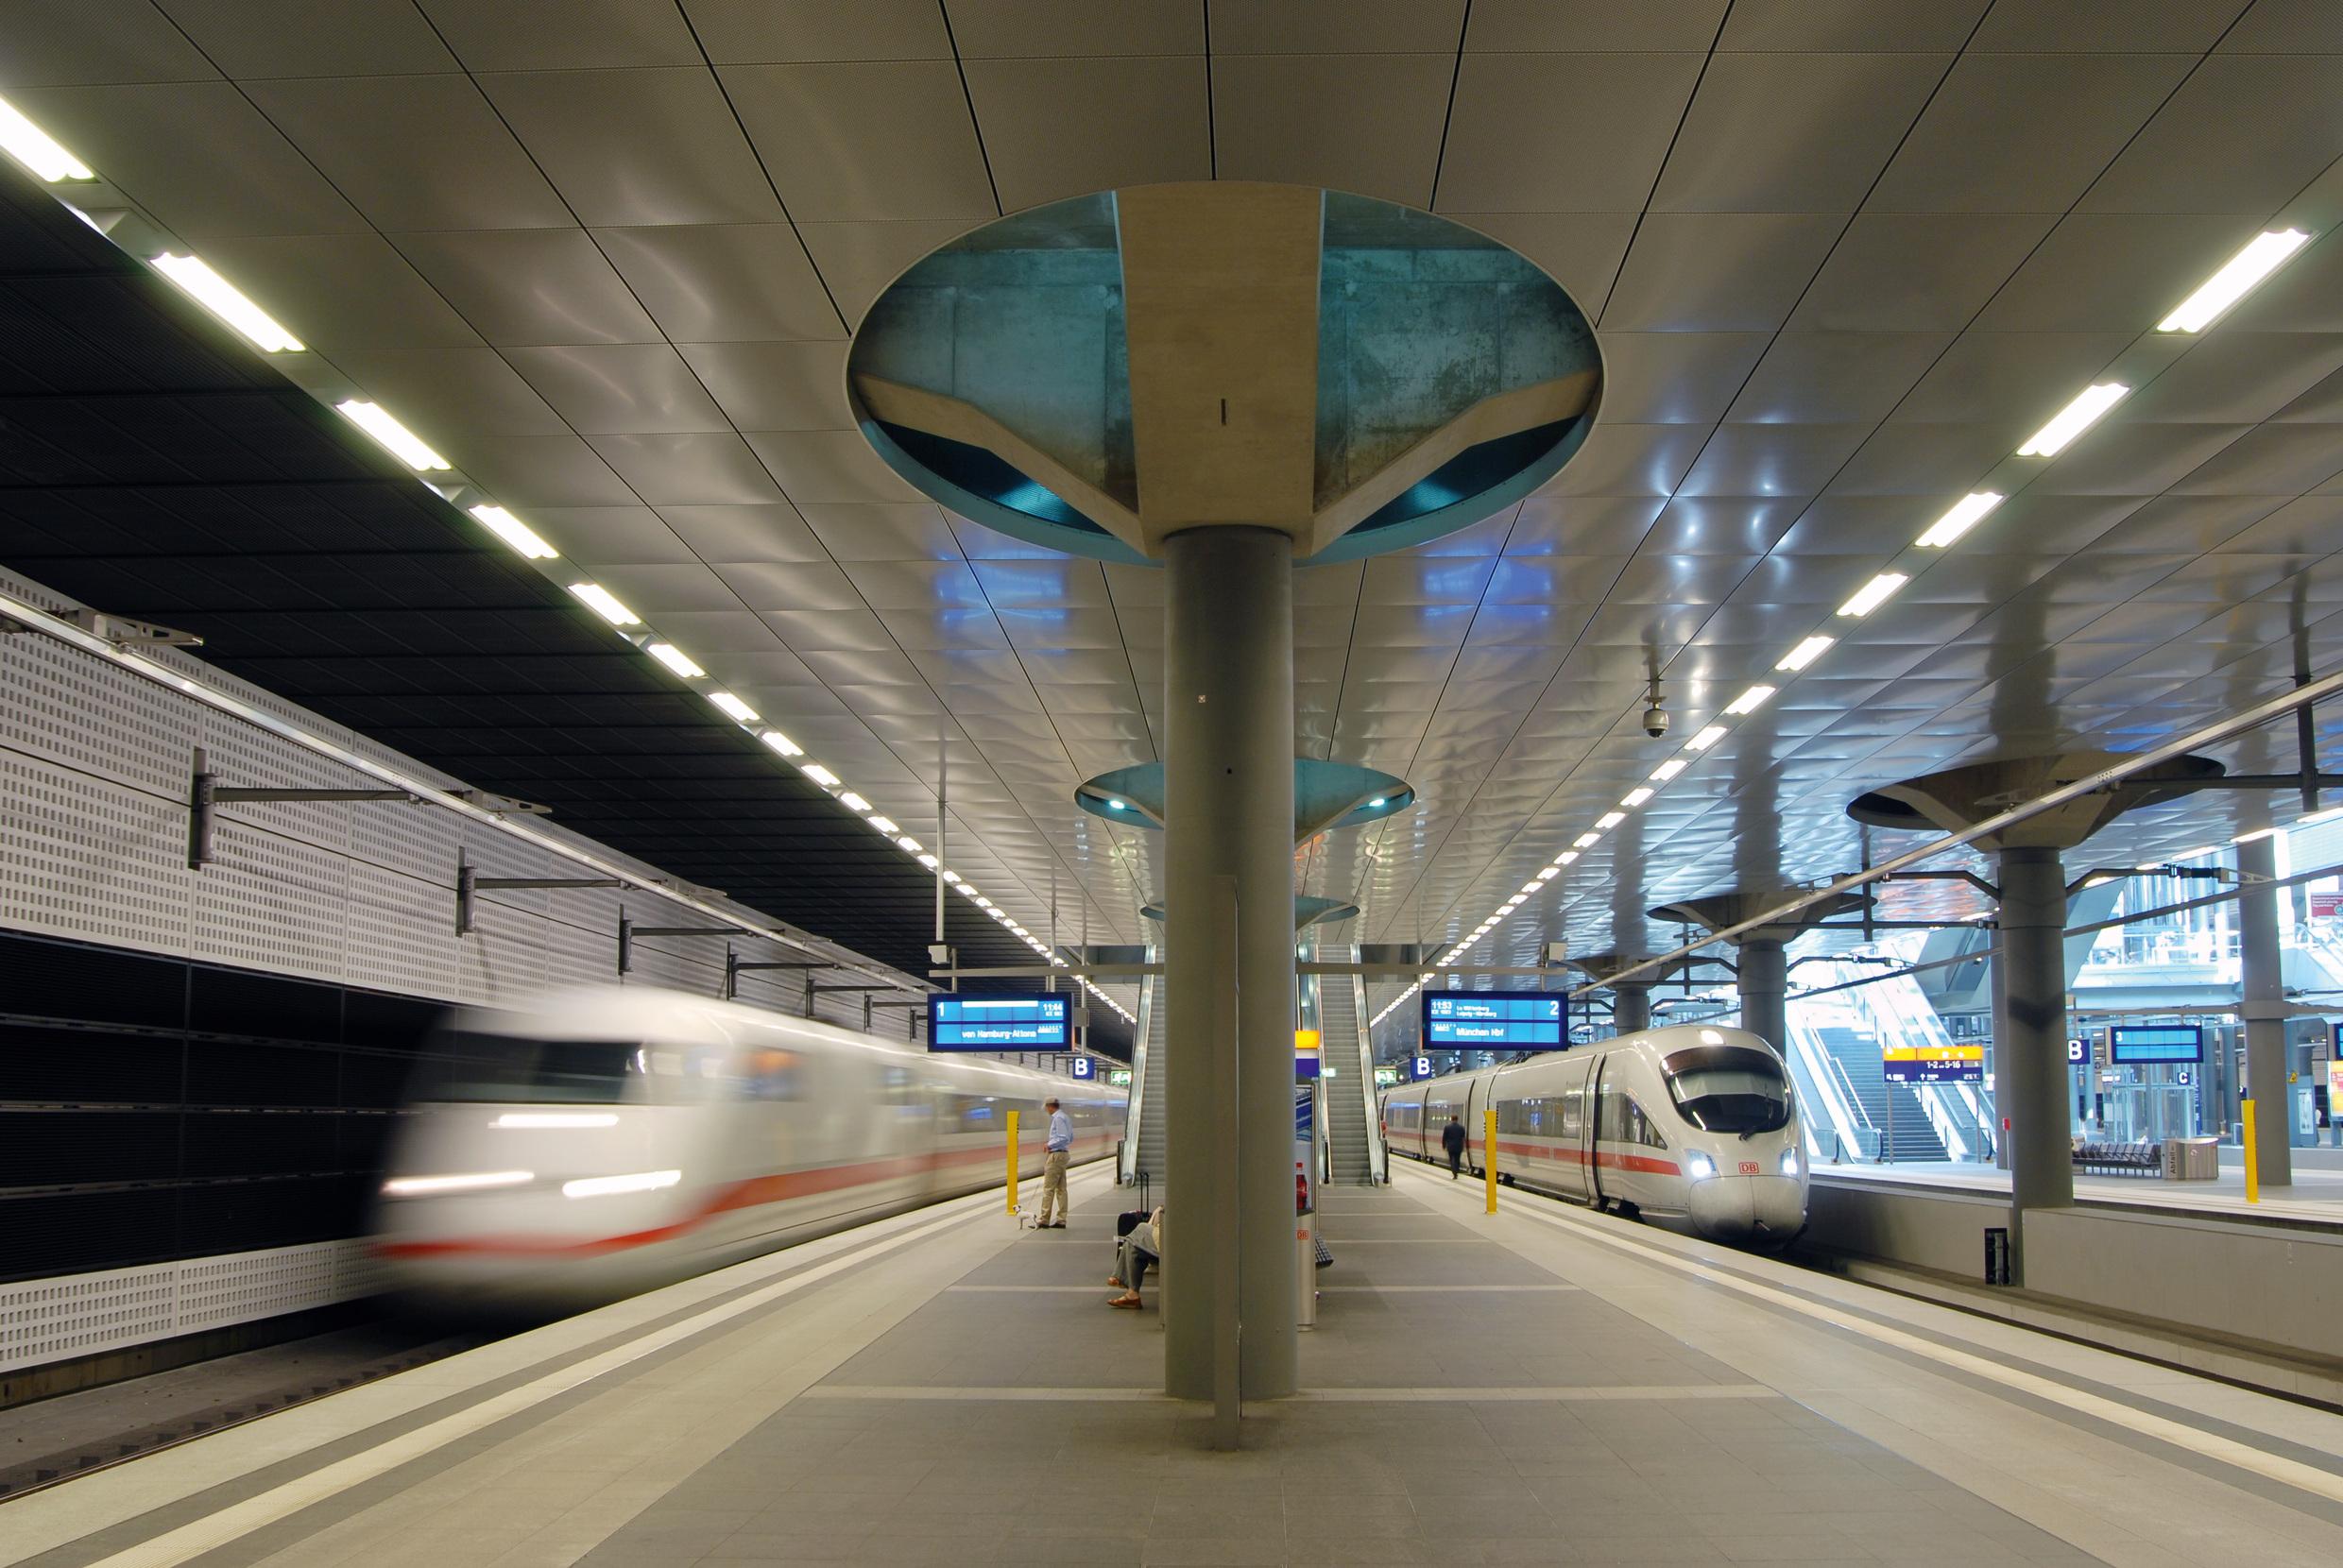 A view of the underground platforms at Berlin Central Station in the East regional area with a stationary and departing ICE train.